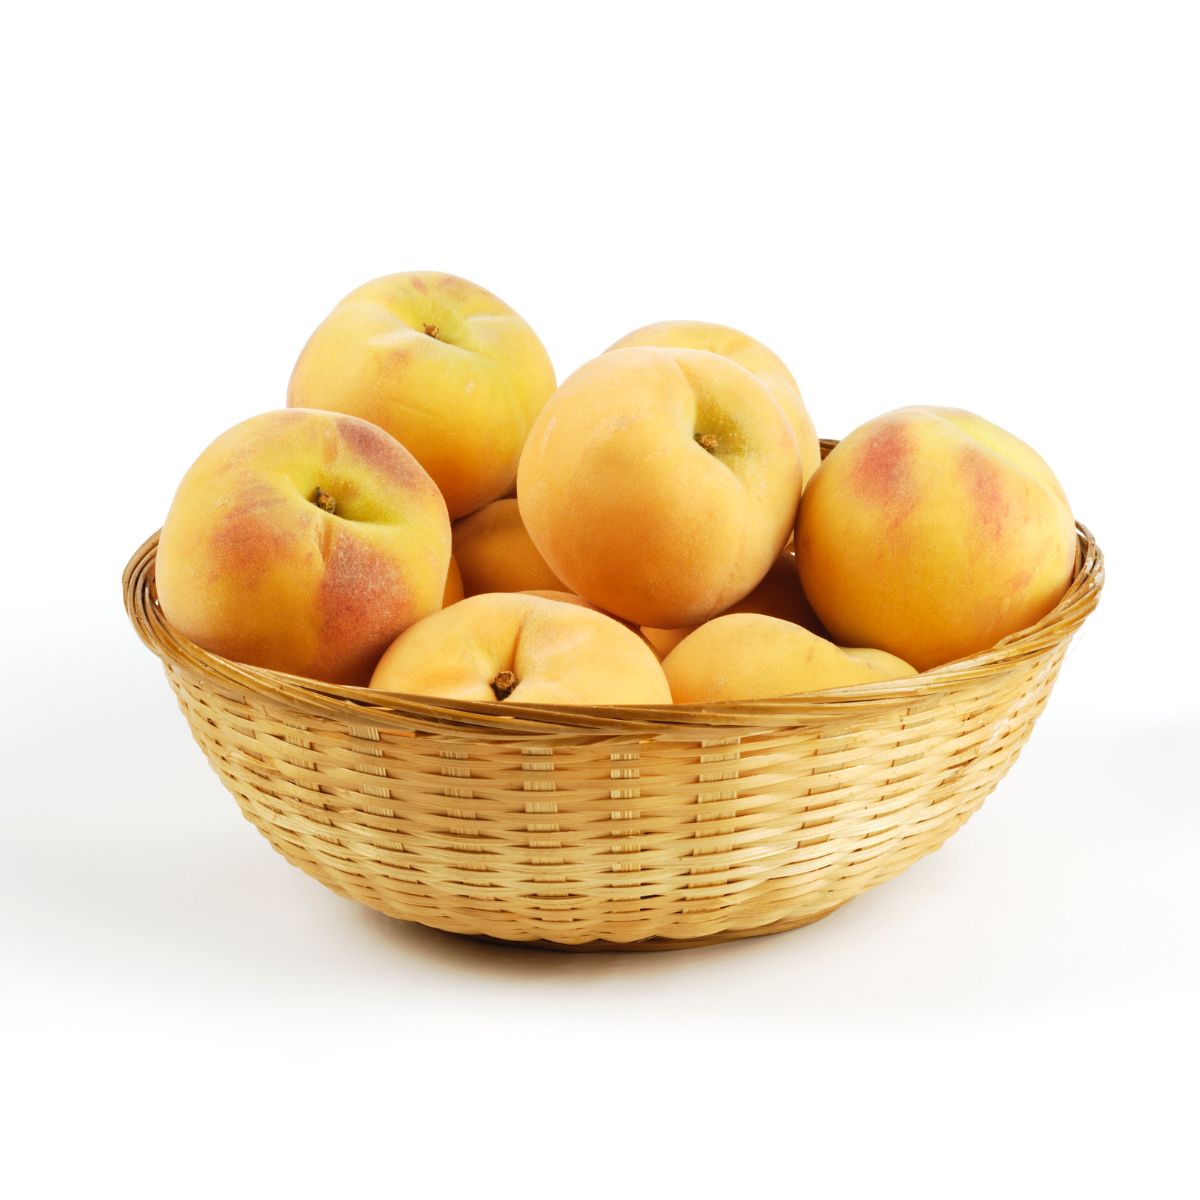 A bunch of yellow peaches in a basket.